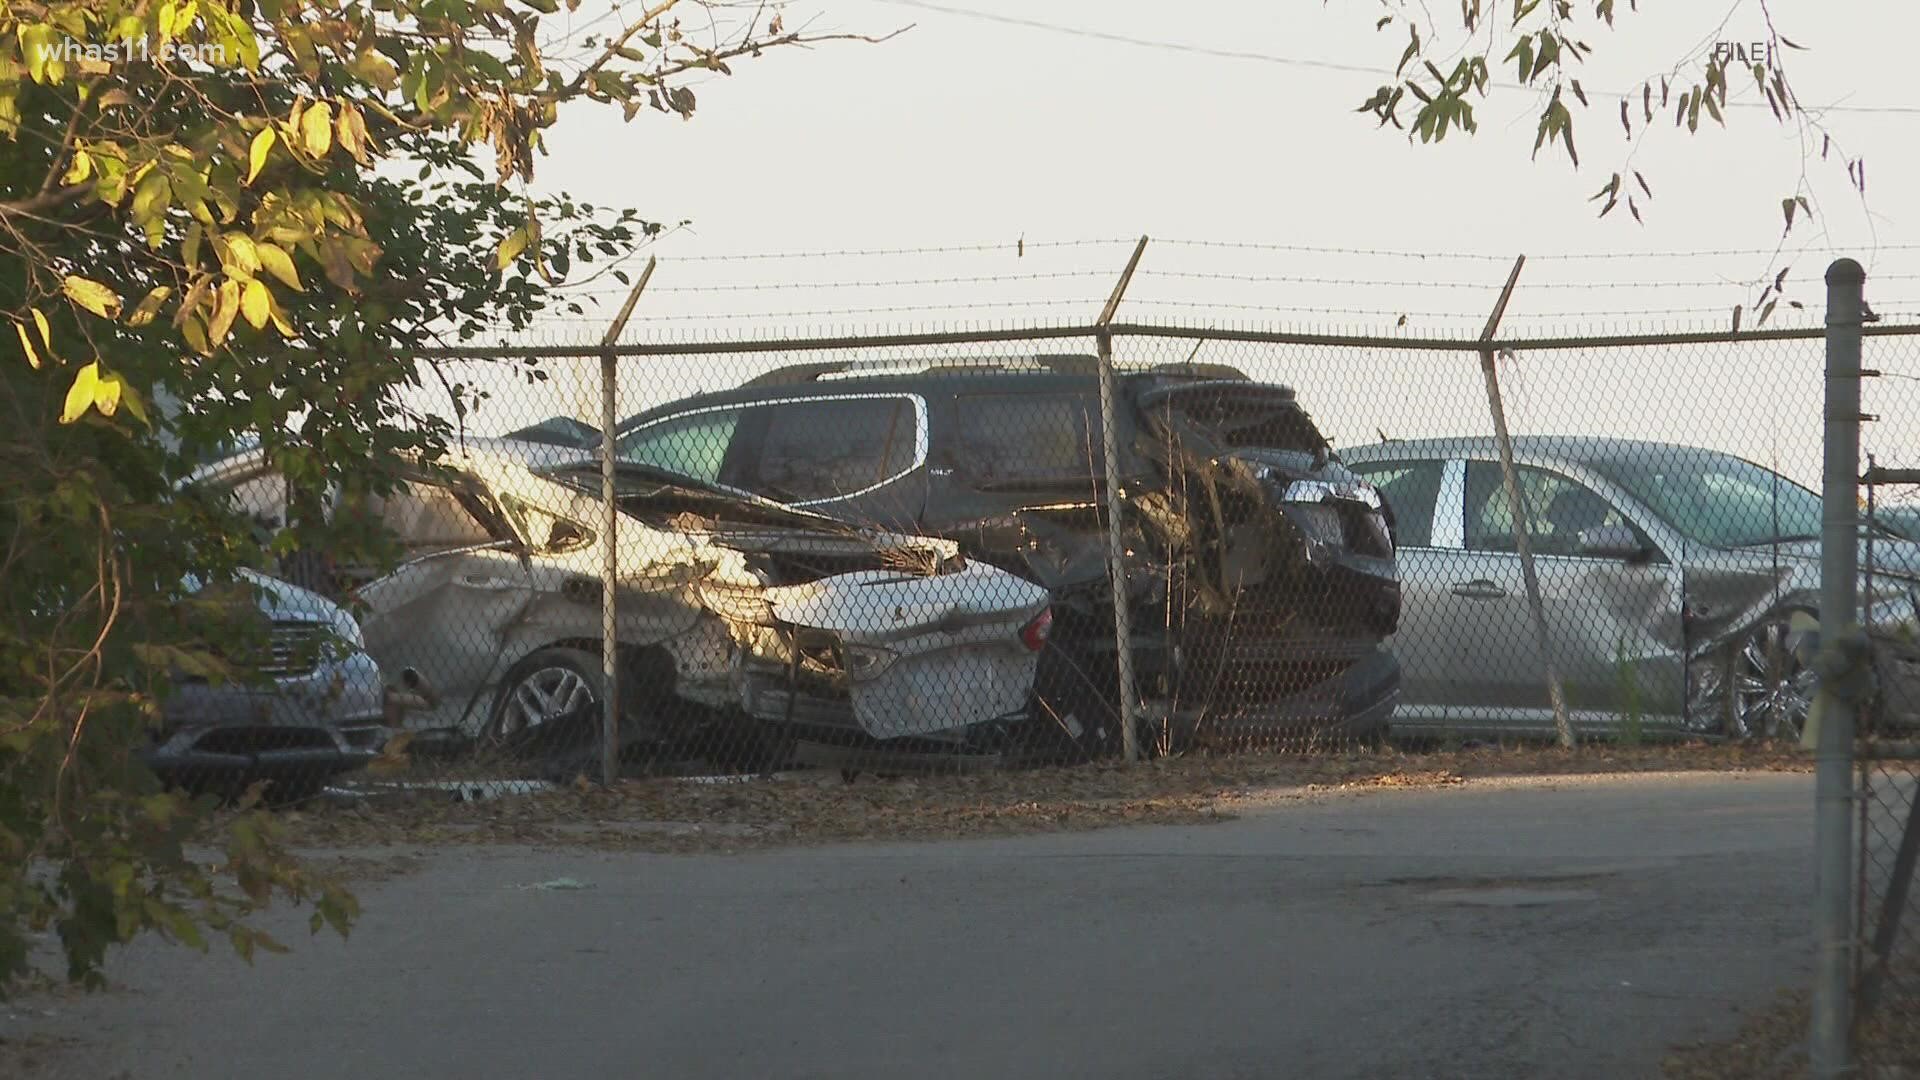 LMPD said the issue goes beyond abandoned cars being an eyesore, but also a safety issue.